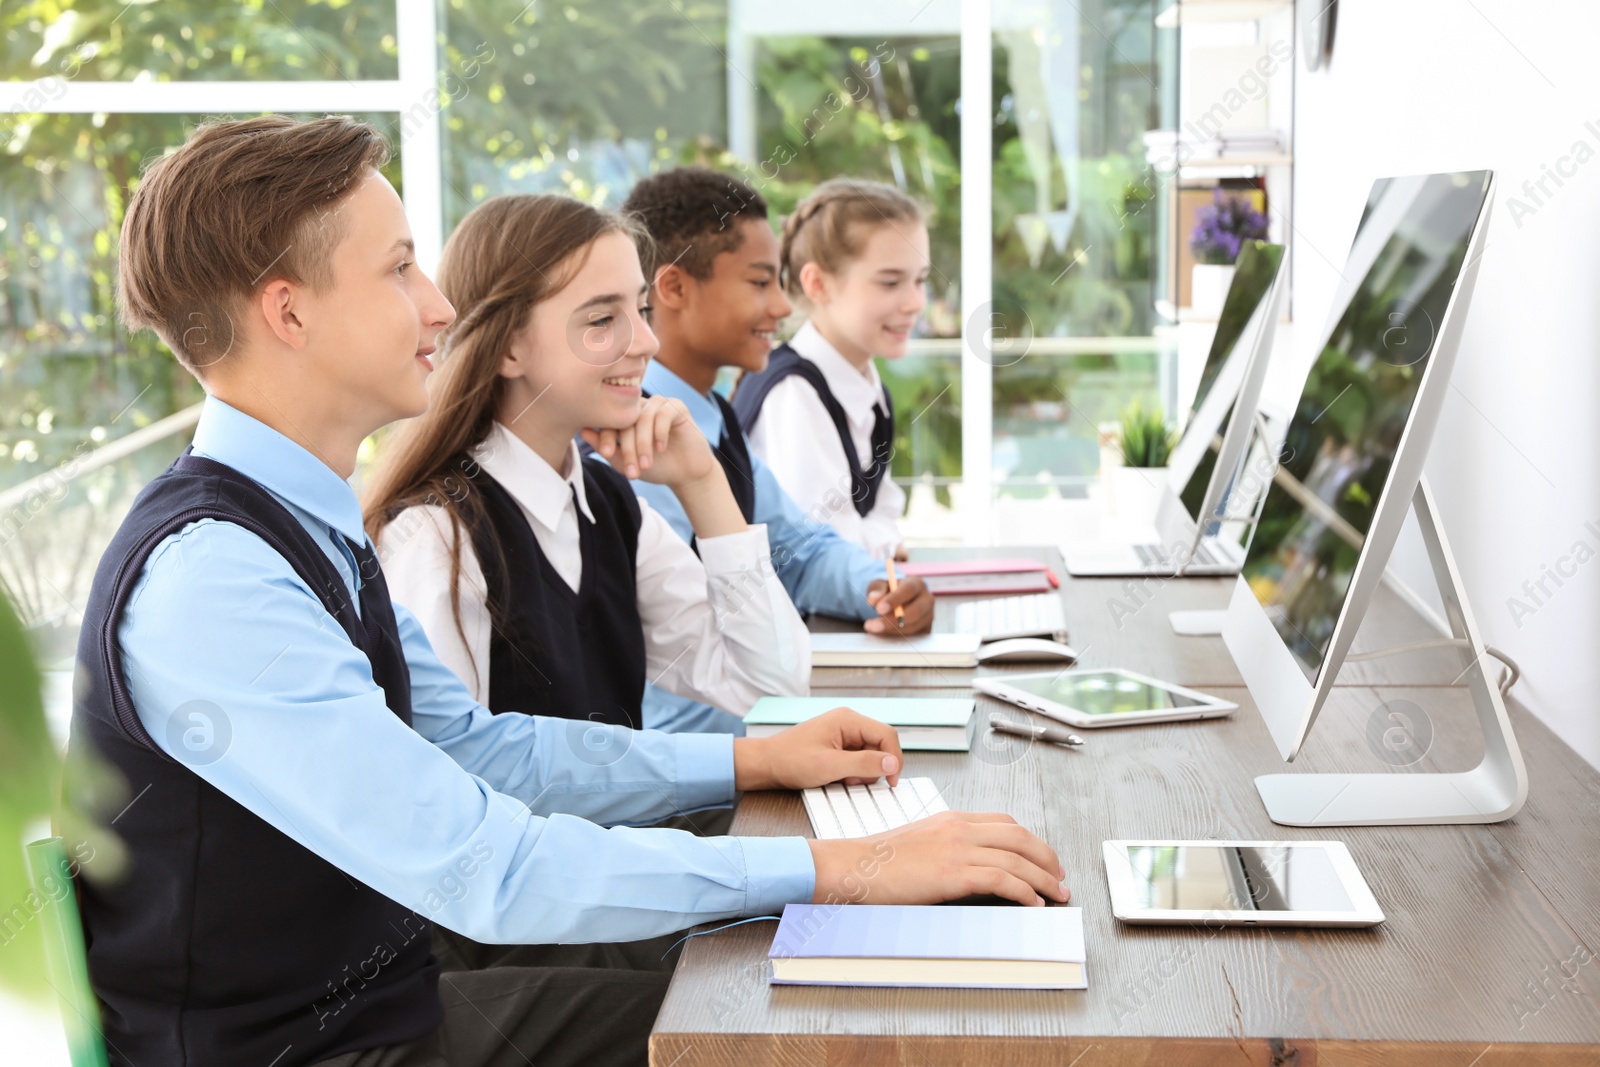 Photo of Teenage students in stylish school uniform at desks with computers